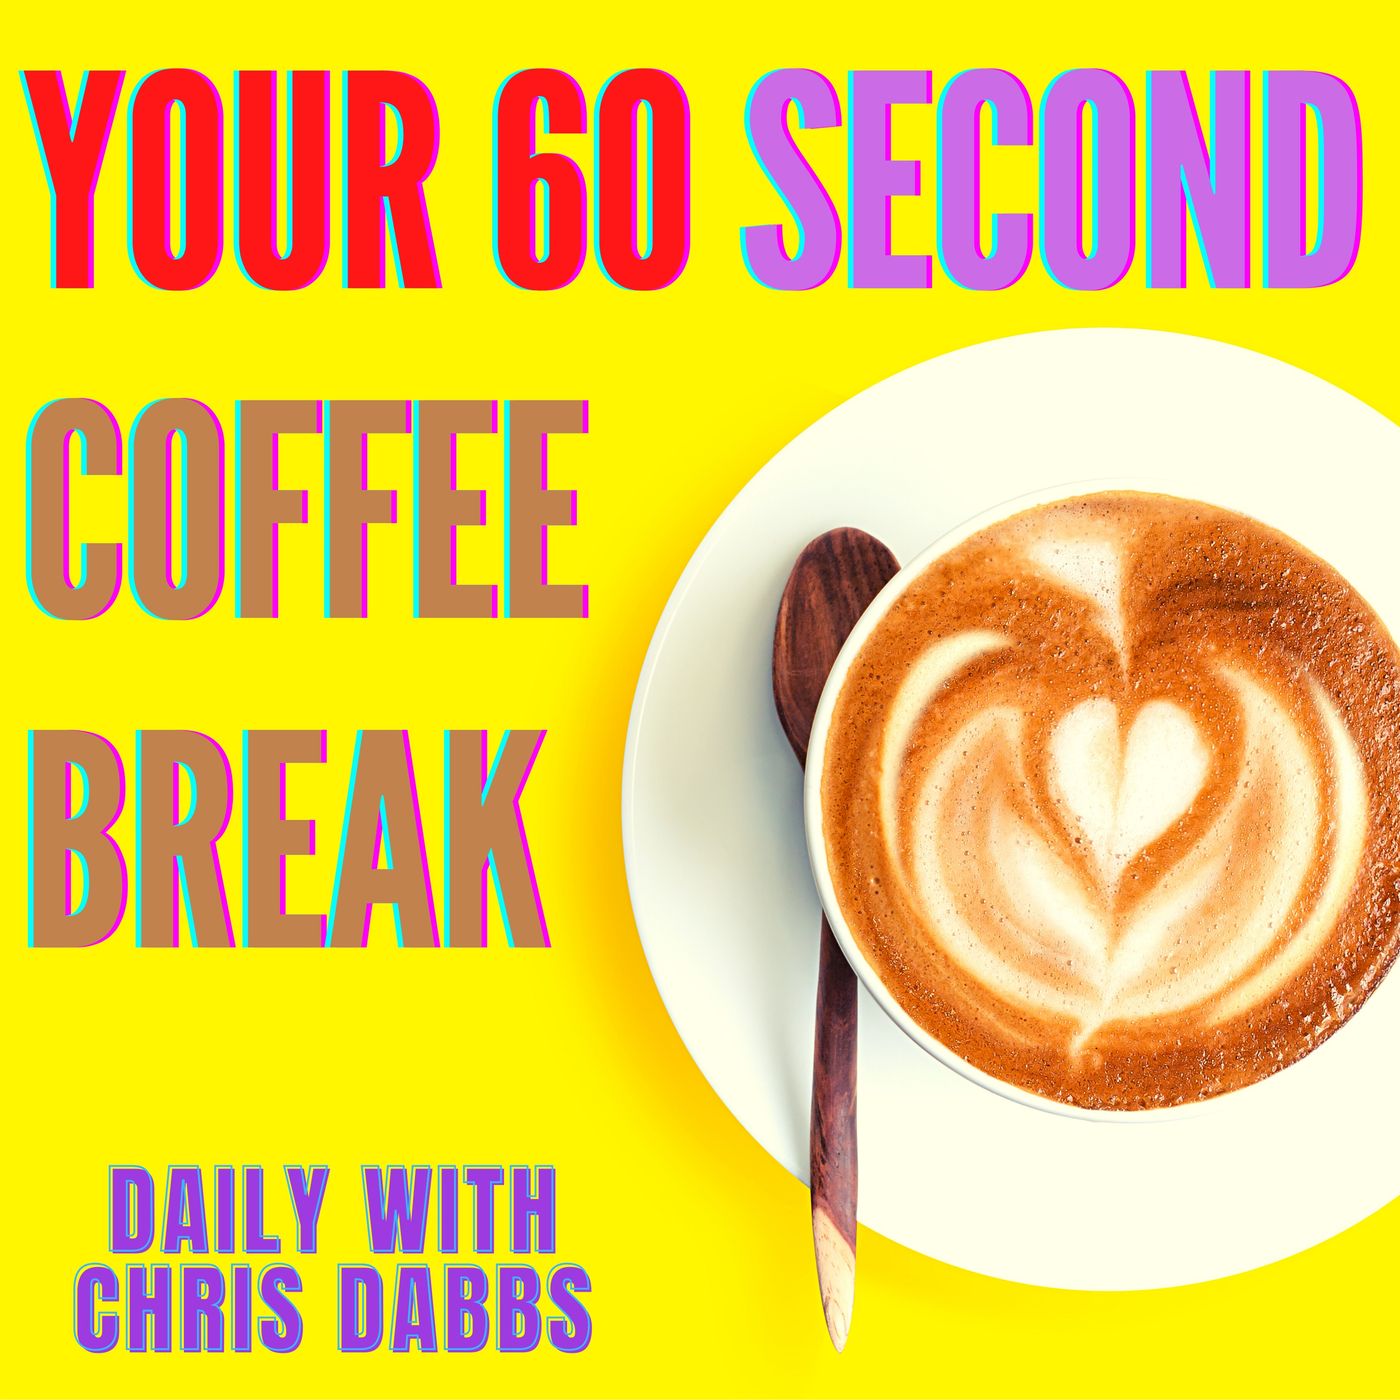 Your 60 Second Coffee Break with Chris Dabbs - Episode 19 Image